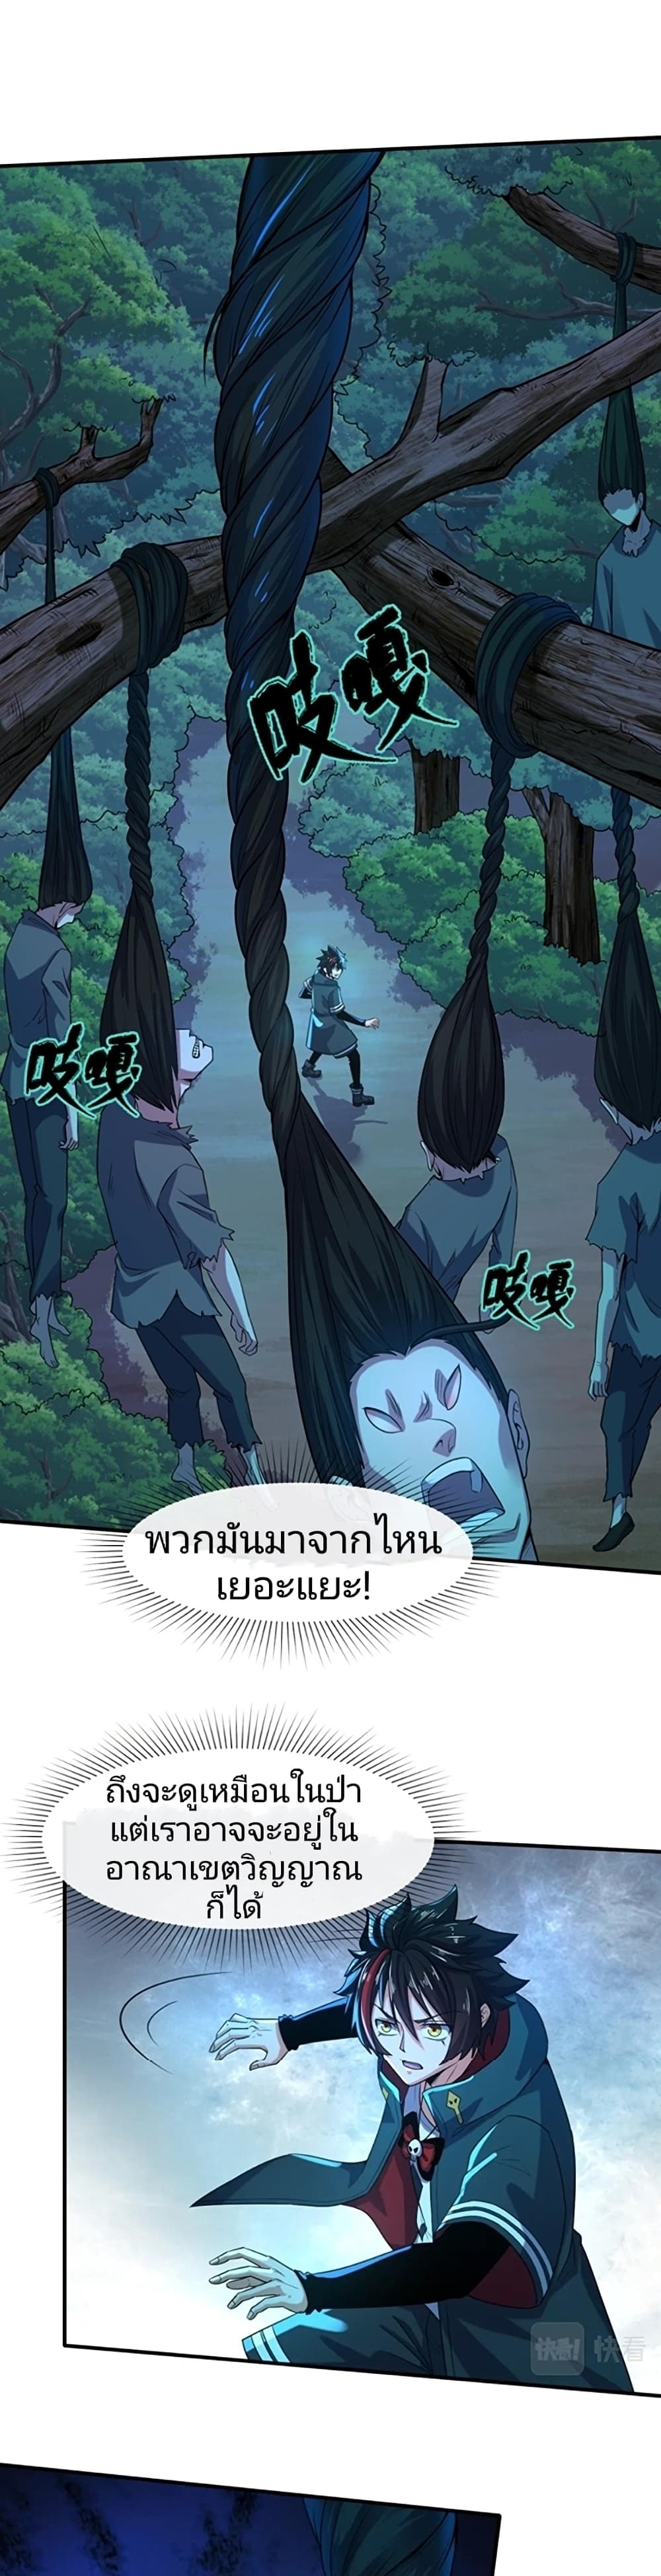 The Age of Ghost Spirits à¸à¸­à¸à¸à¸µà¹ 8 (36)